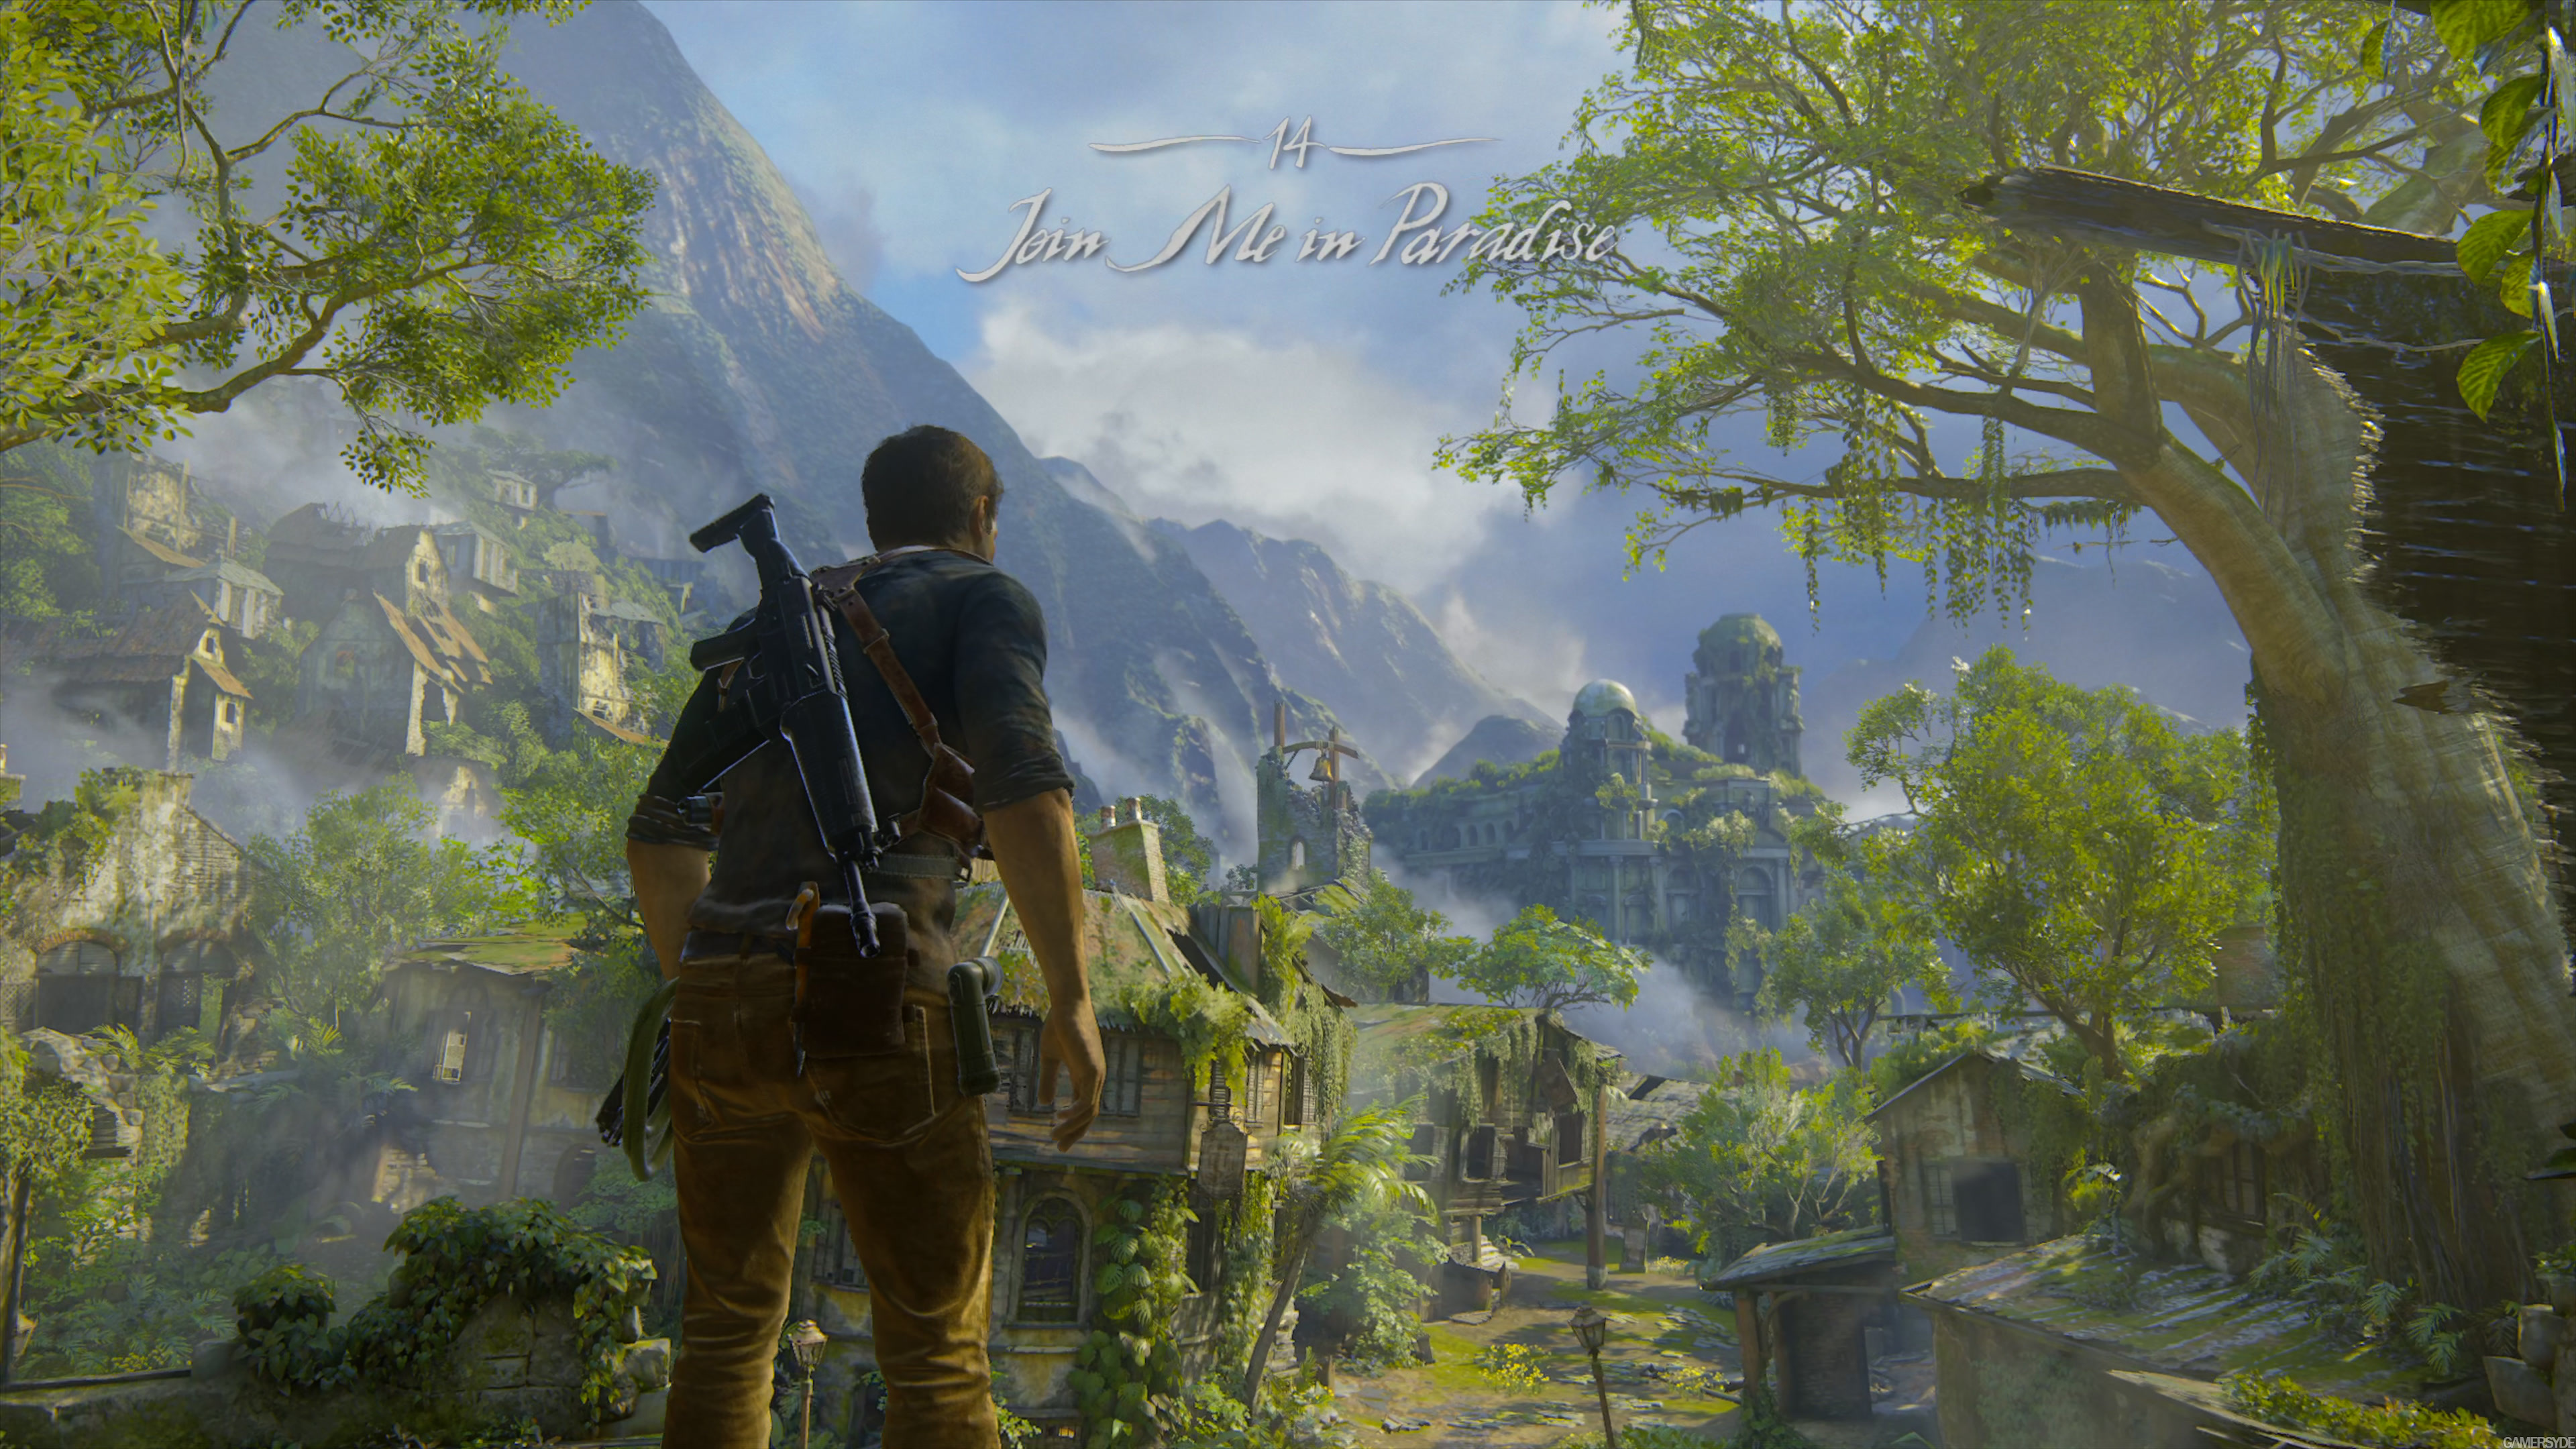 Download Uncharted 4 A Thief's End Free PC Game Full Version